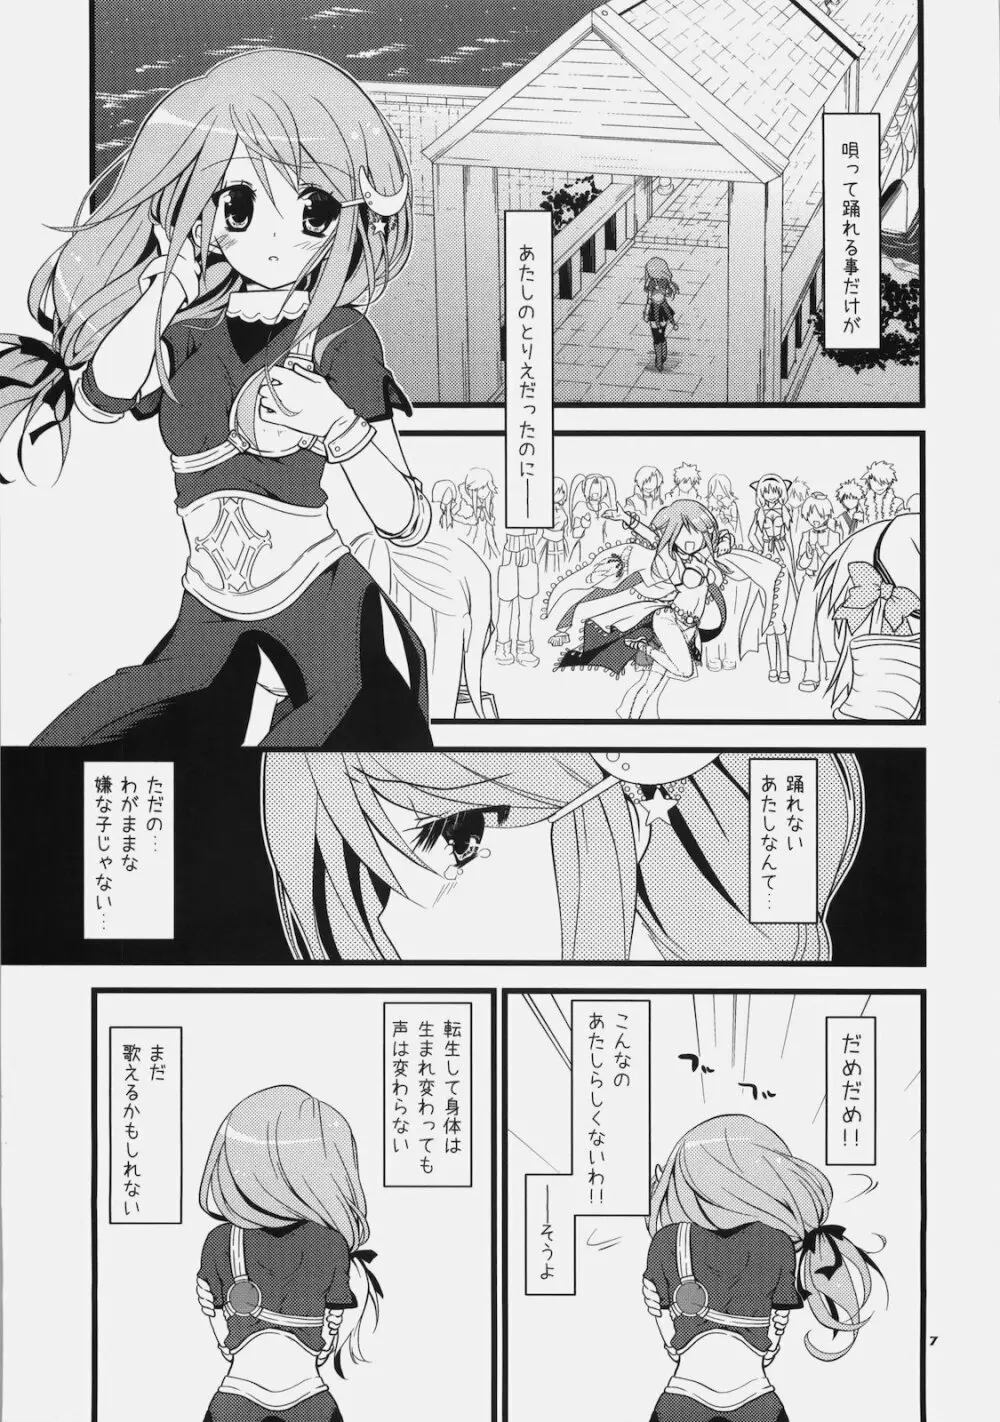 Daily RO 3 Page.7